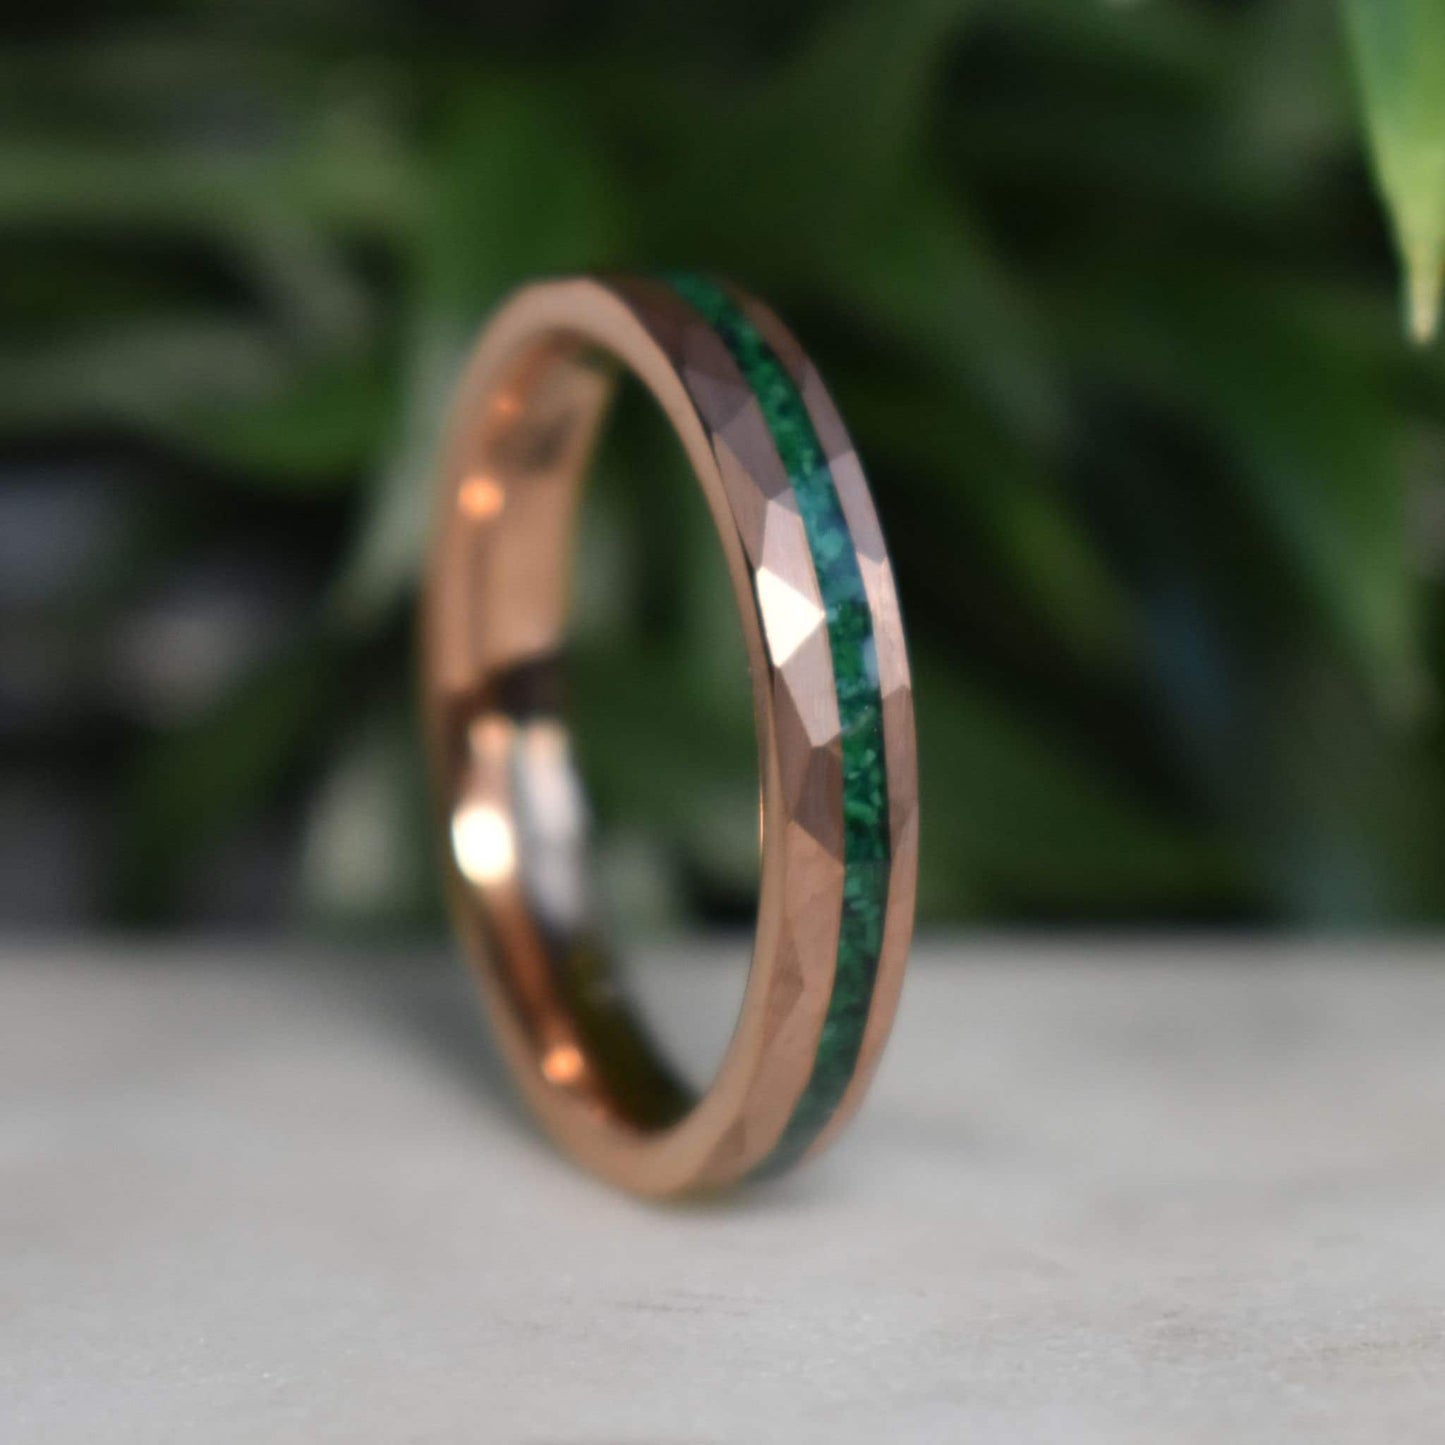 Tungsten 4mm Hammered Rose Gold Ring with Malachite Inlay